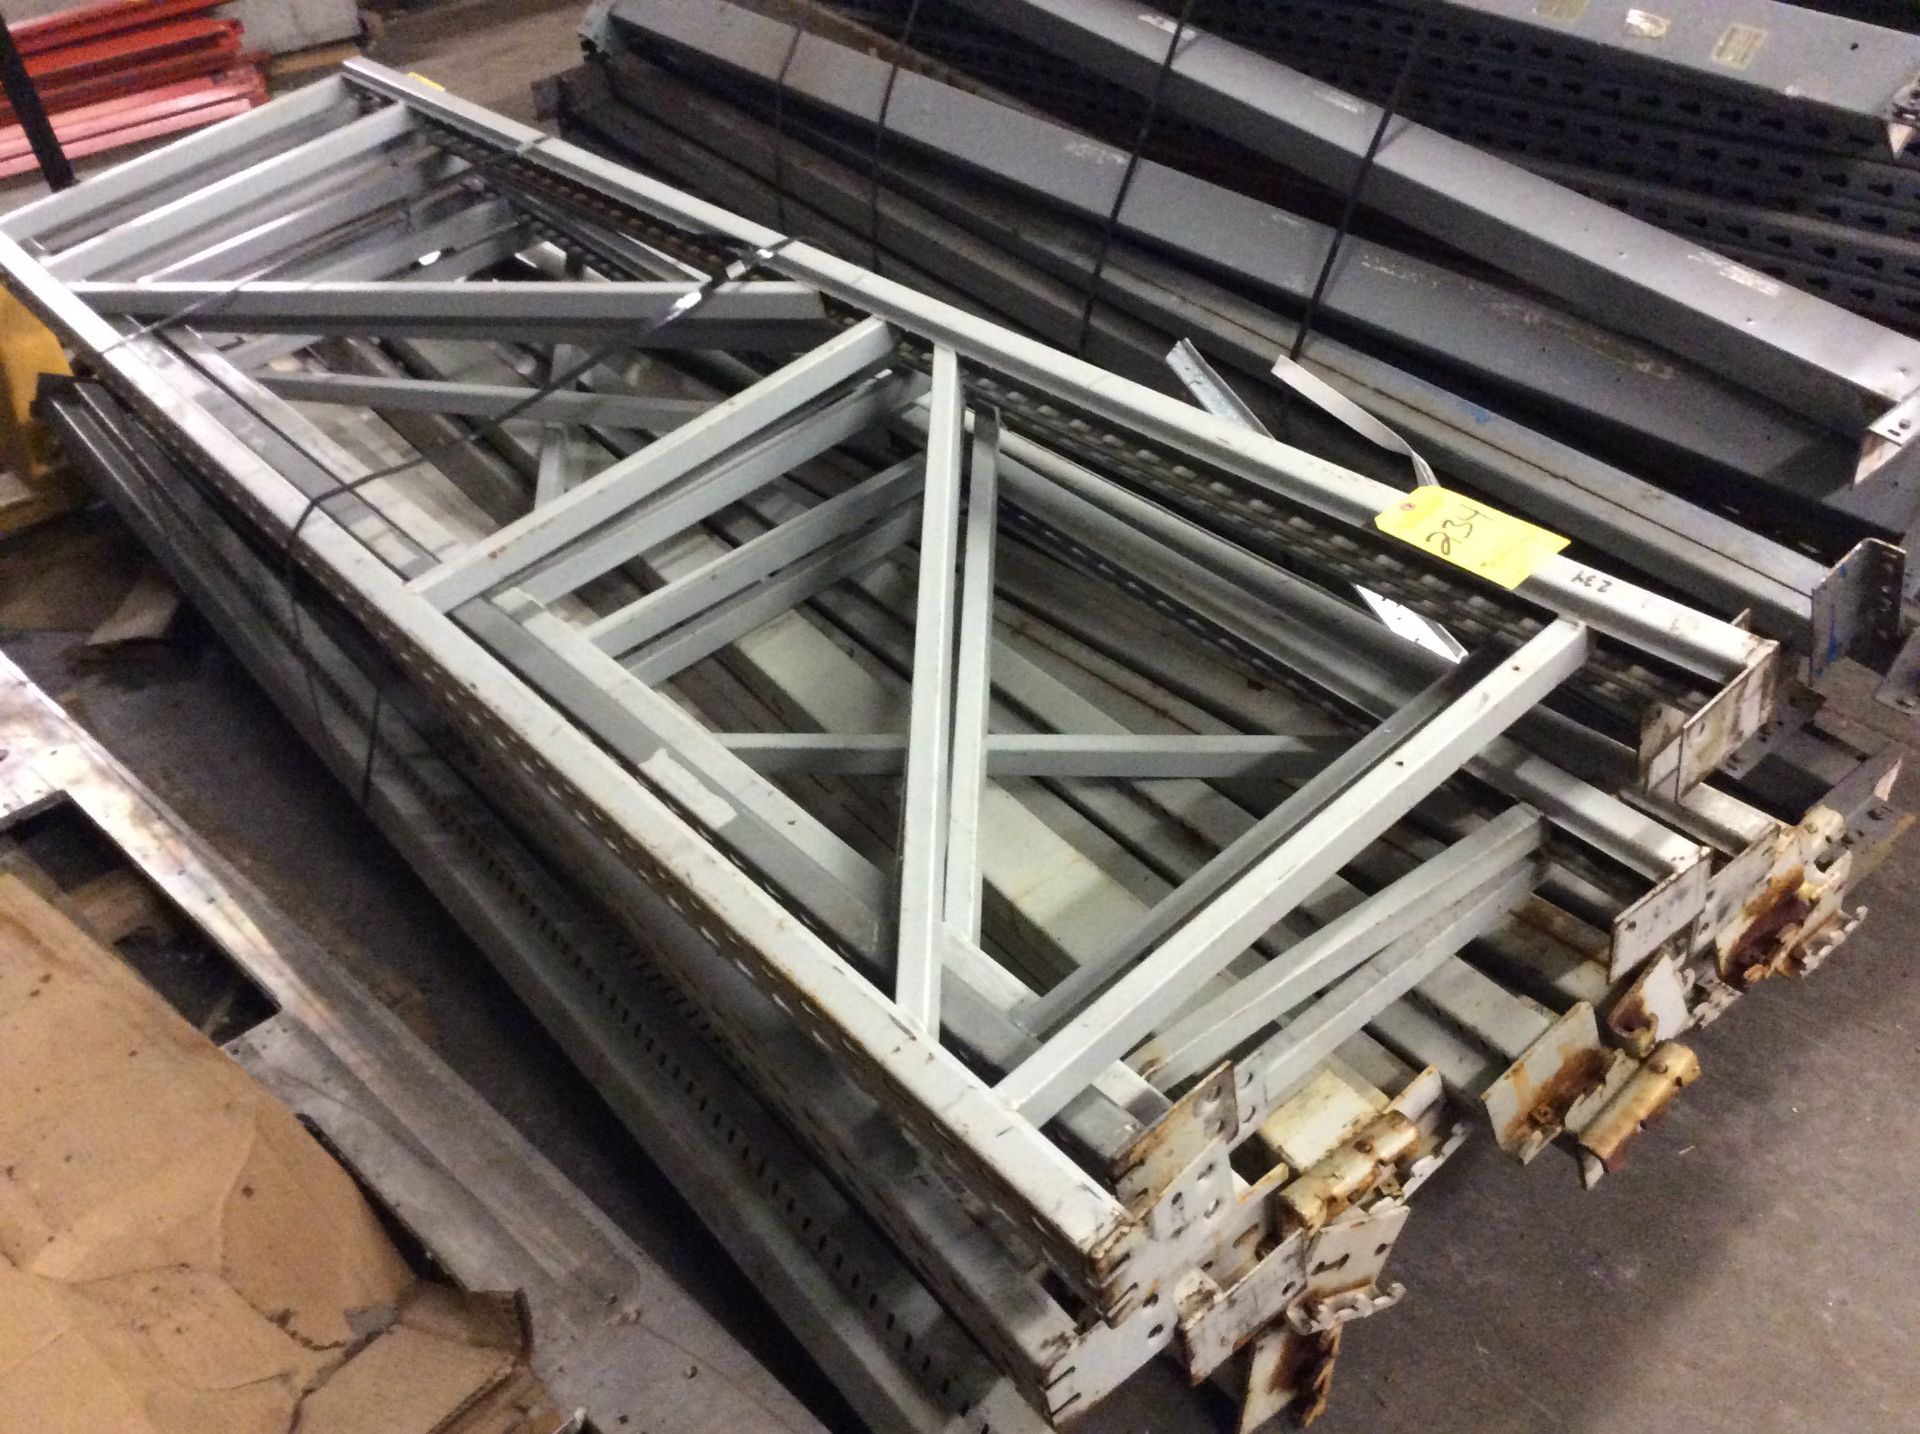 Lot, Pallet Racking, Disassembled, (19) Uprights 10 Ft. X 27 In. Depth, (17) Uprights 8 Ft. X 27 In.